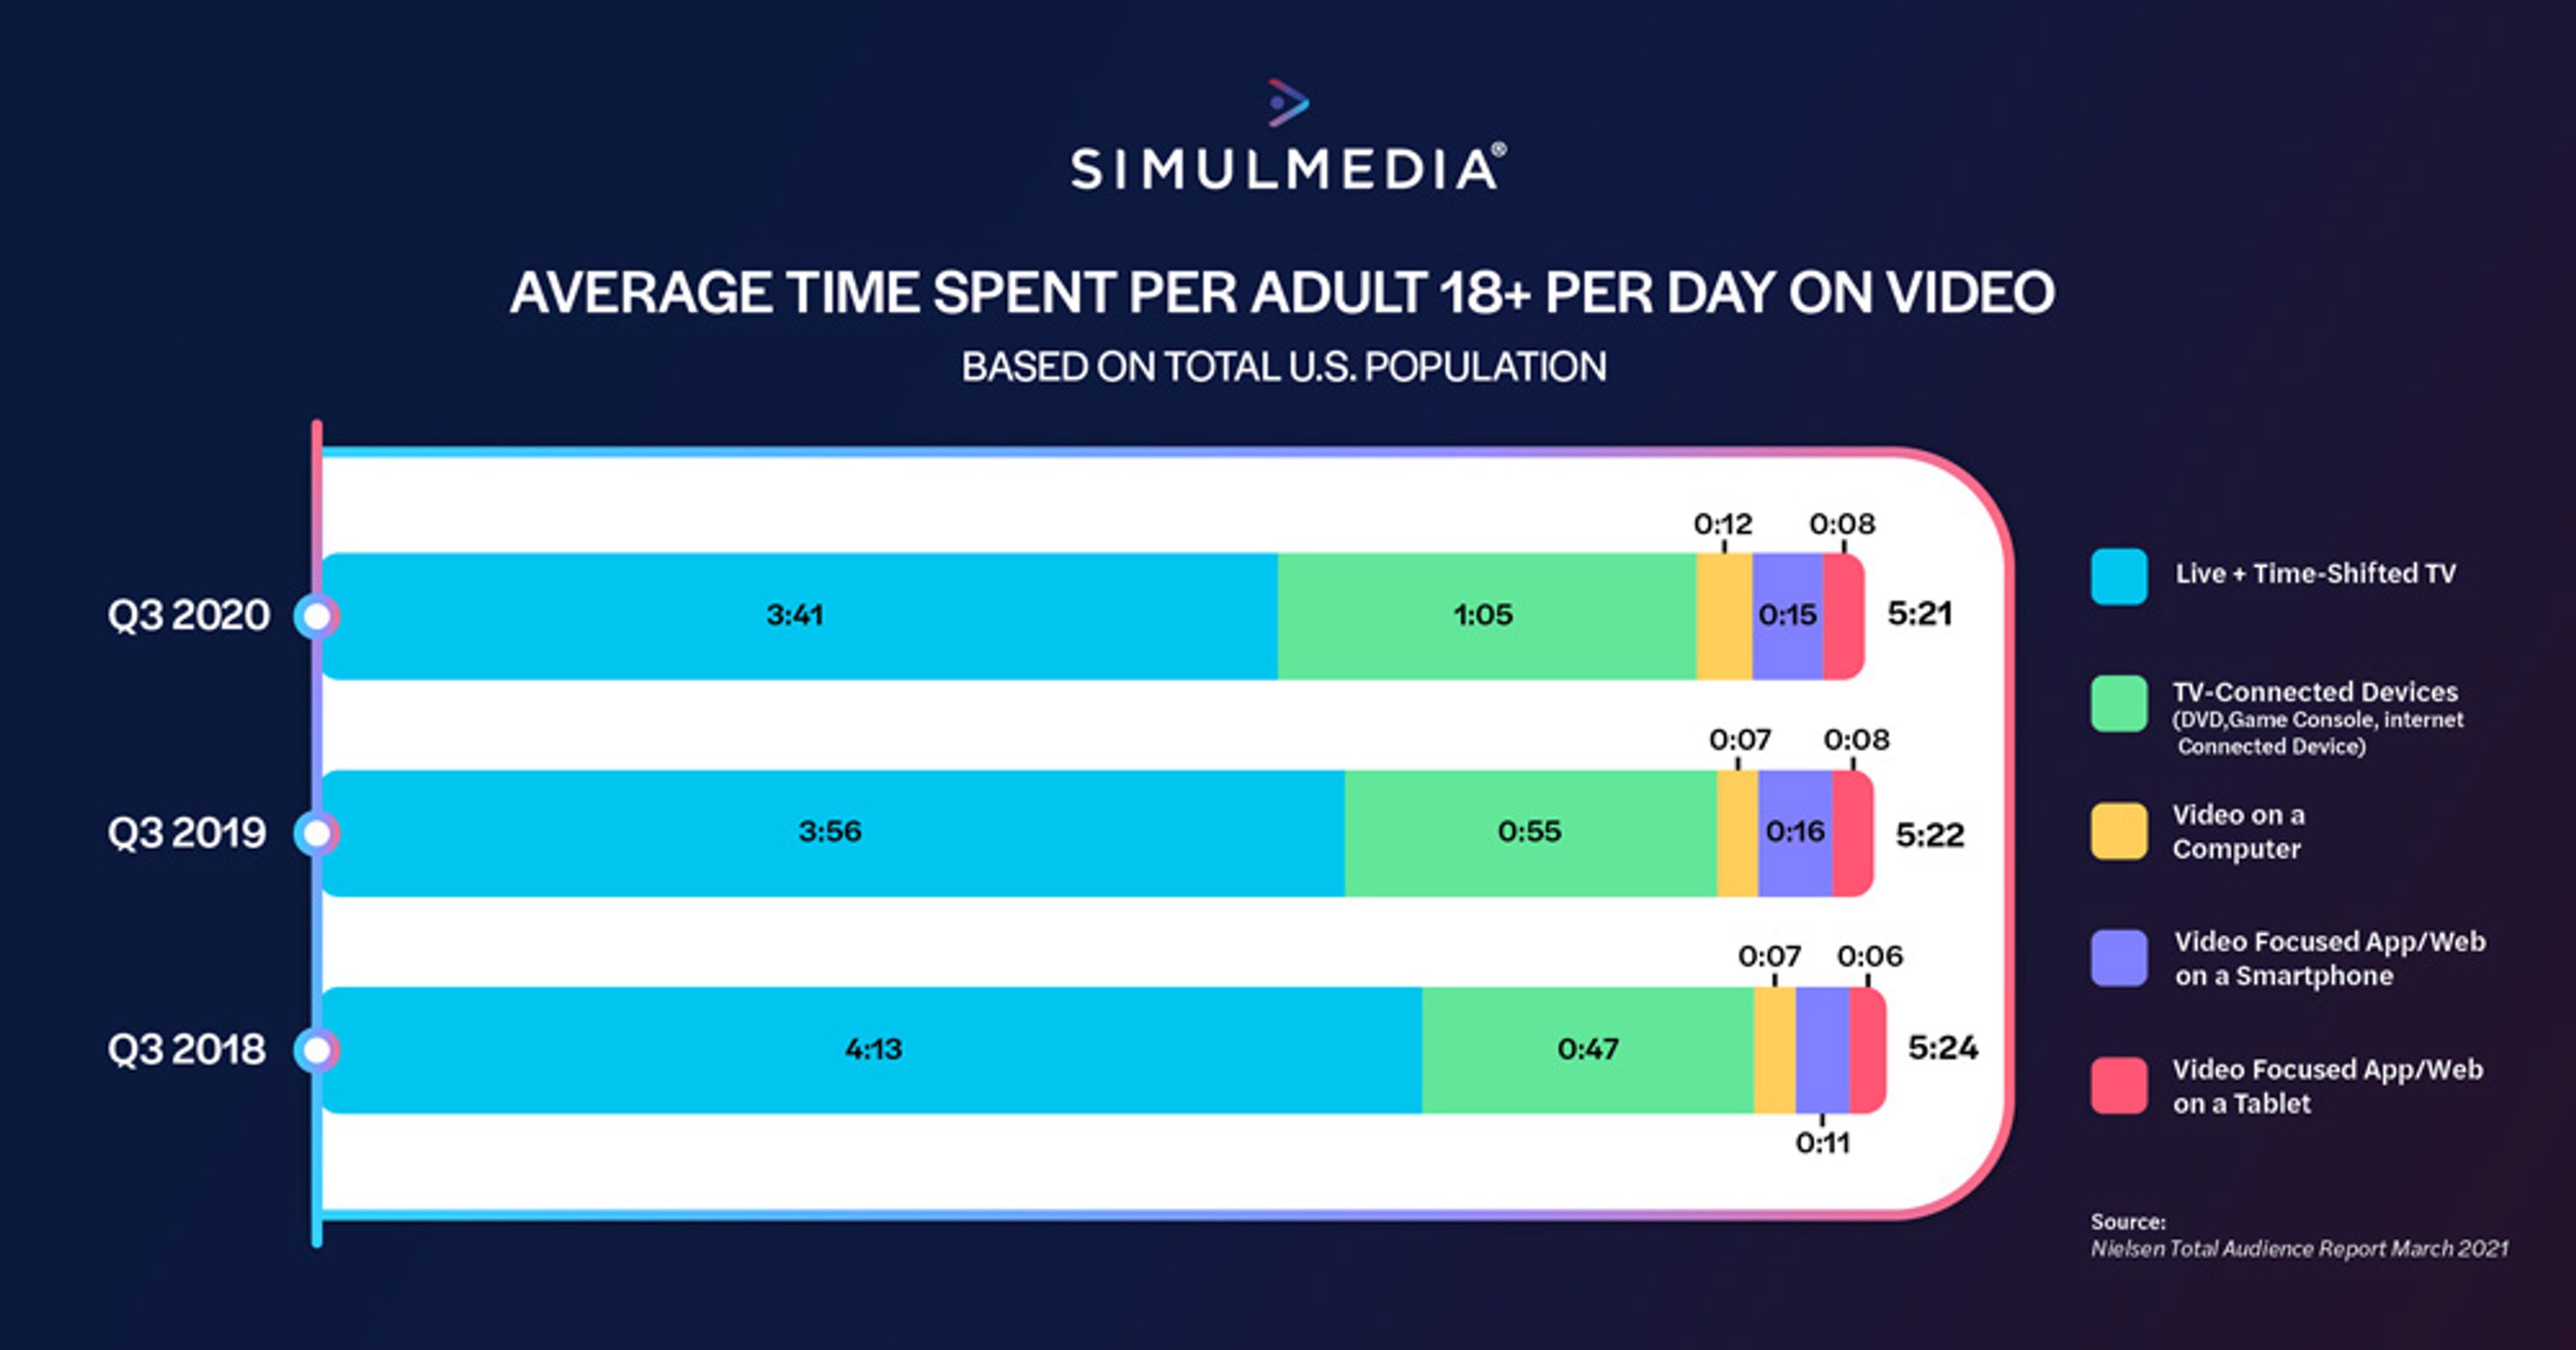 Bar chart showing average time spent for adults 18+ per day on video across live TV, TV-connected devices, video on computer, smartphone and tablet.